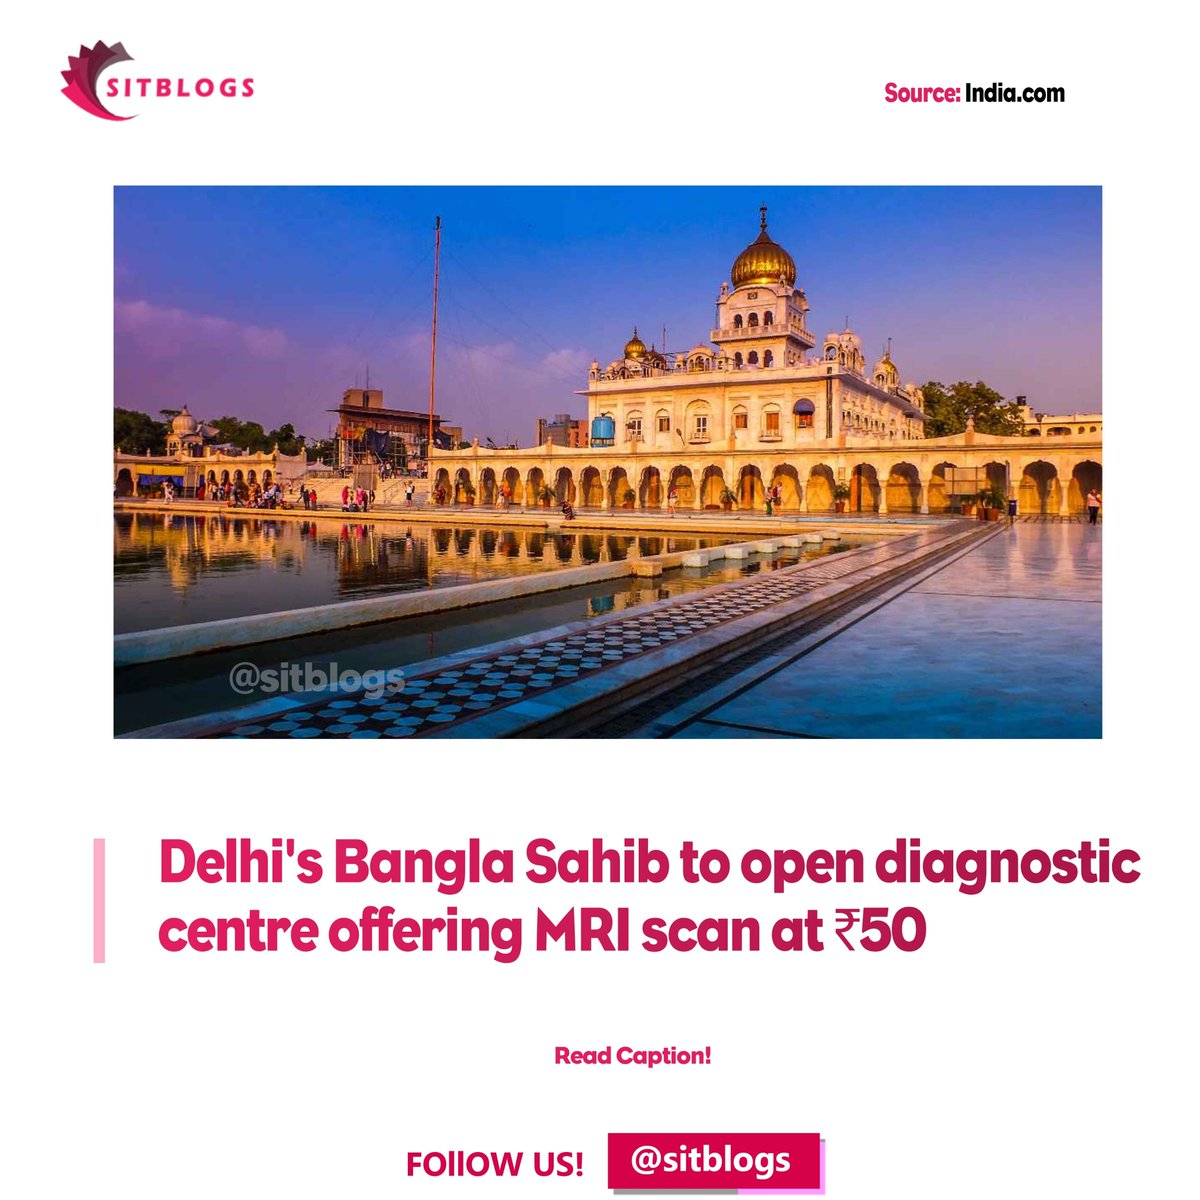 Country's 'cheapest' diagnostic facility will start functioning at #gurdwarabanglasahib in Dec and an MRI will cost just Rs 50, according to the Delhi Sikh Gurdwara Management Committee

Follow us @sitblogs

#trendingnews #sitblogs #somethingistrending #delhi #mumbai